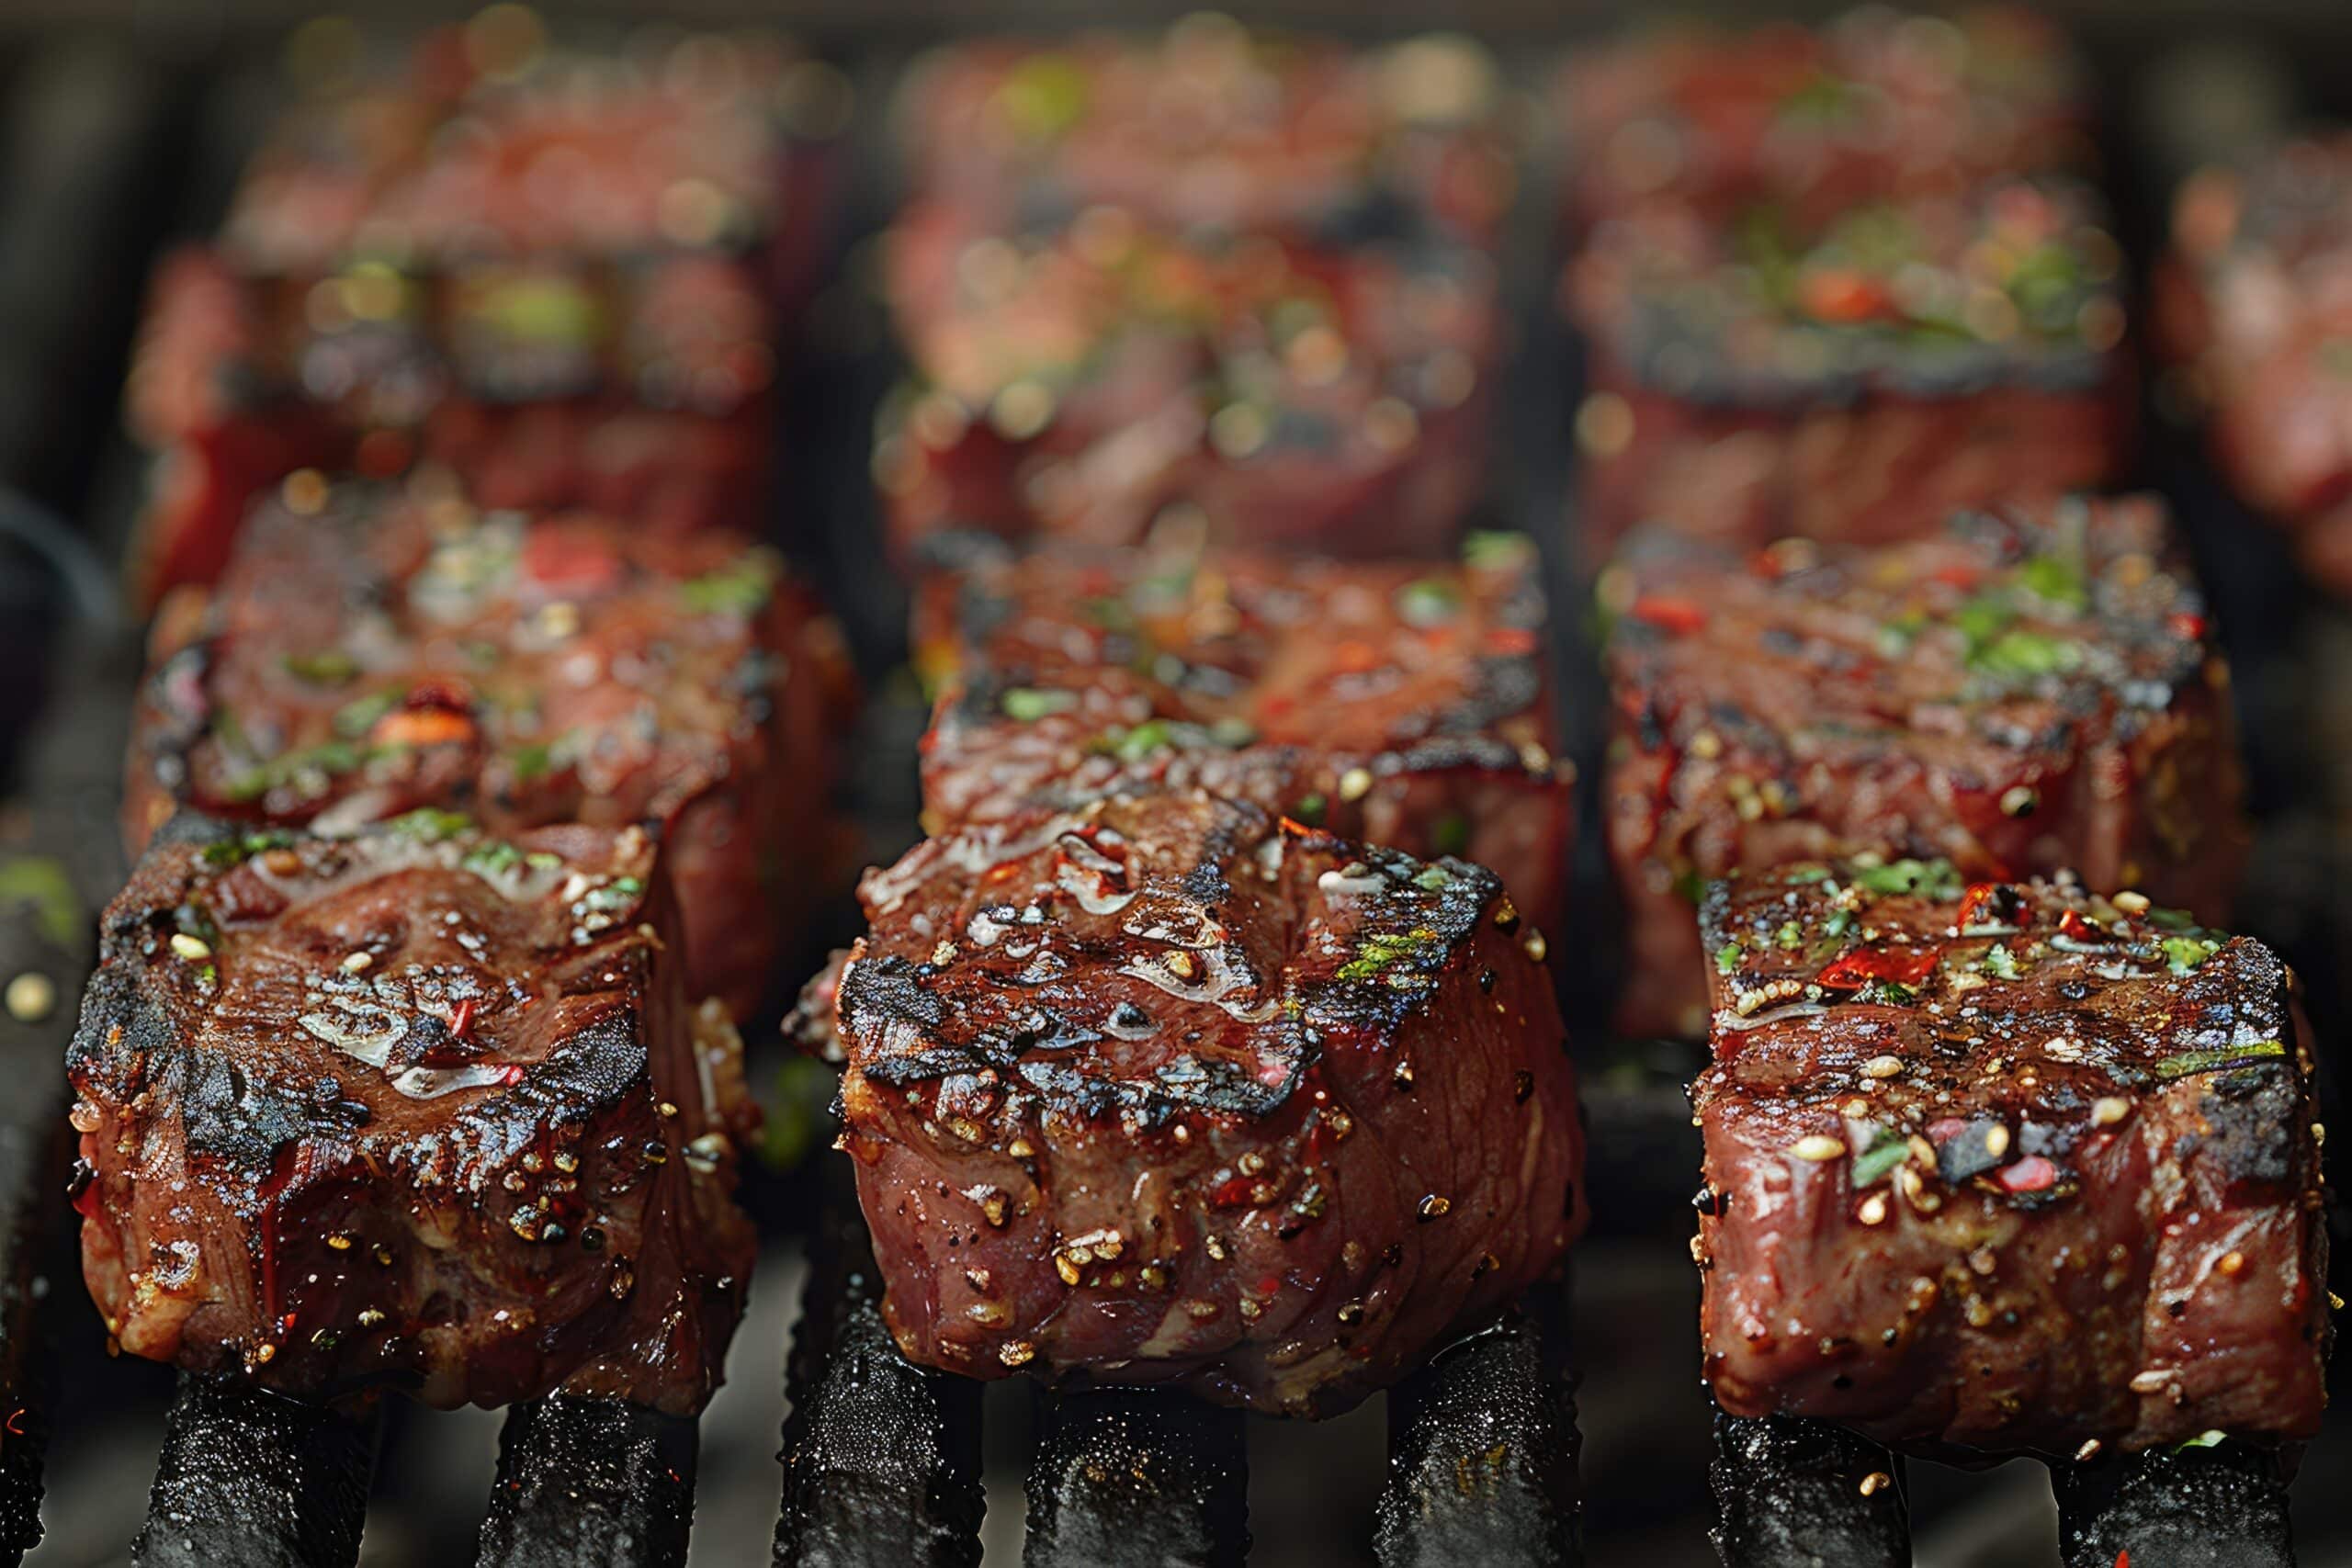 www.appr.com : How To Grill Filet Mignon On Gas Grill?